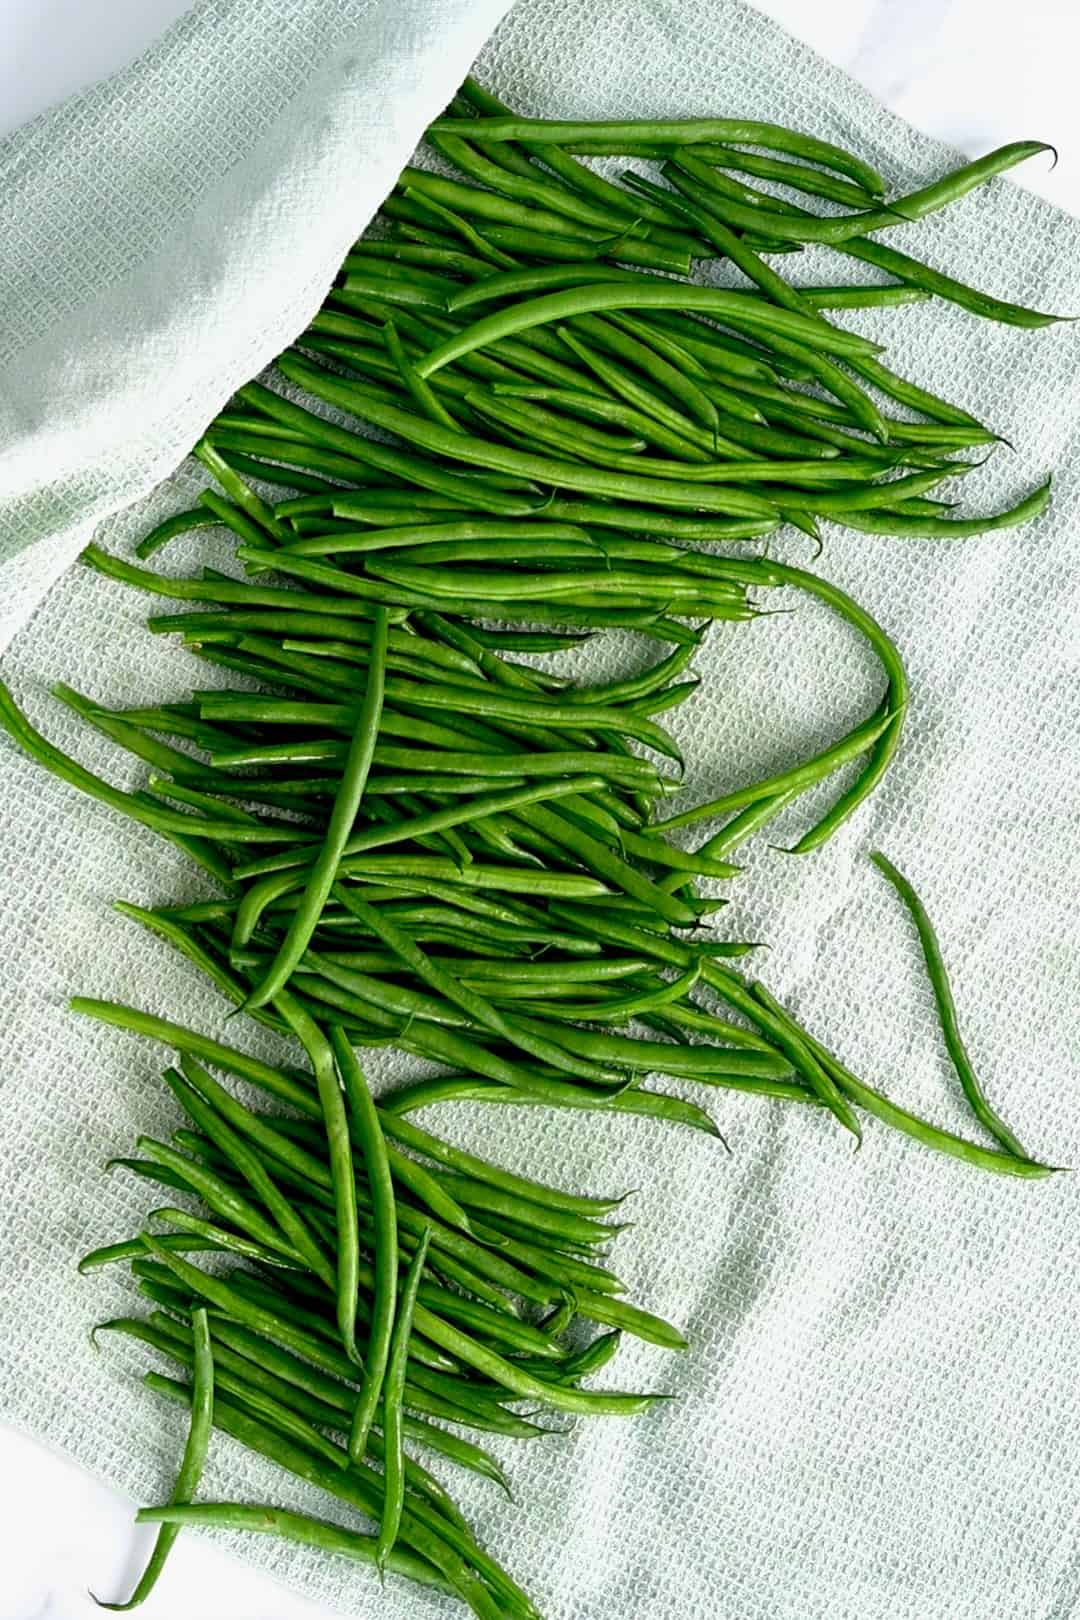 Drying green beans with a towel